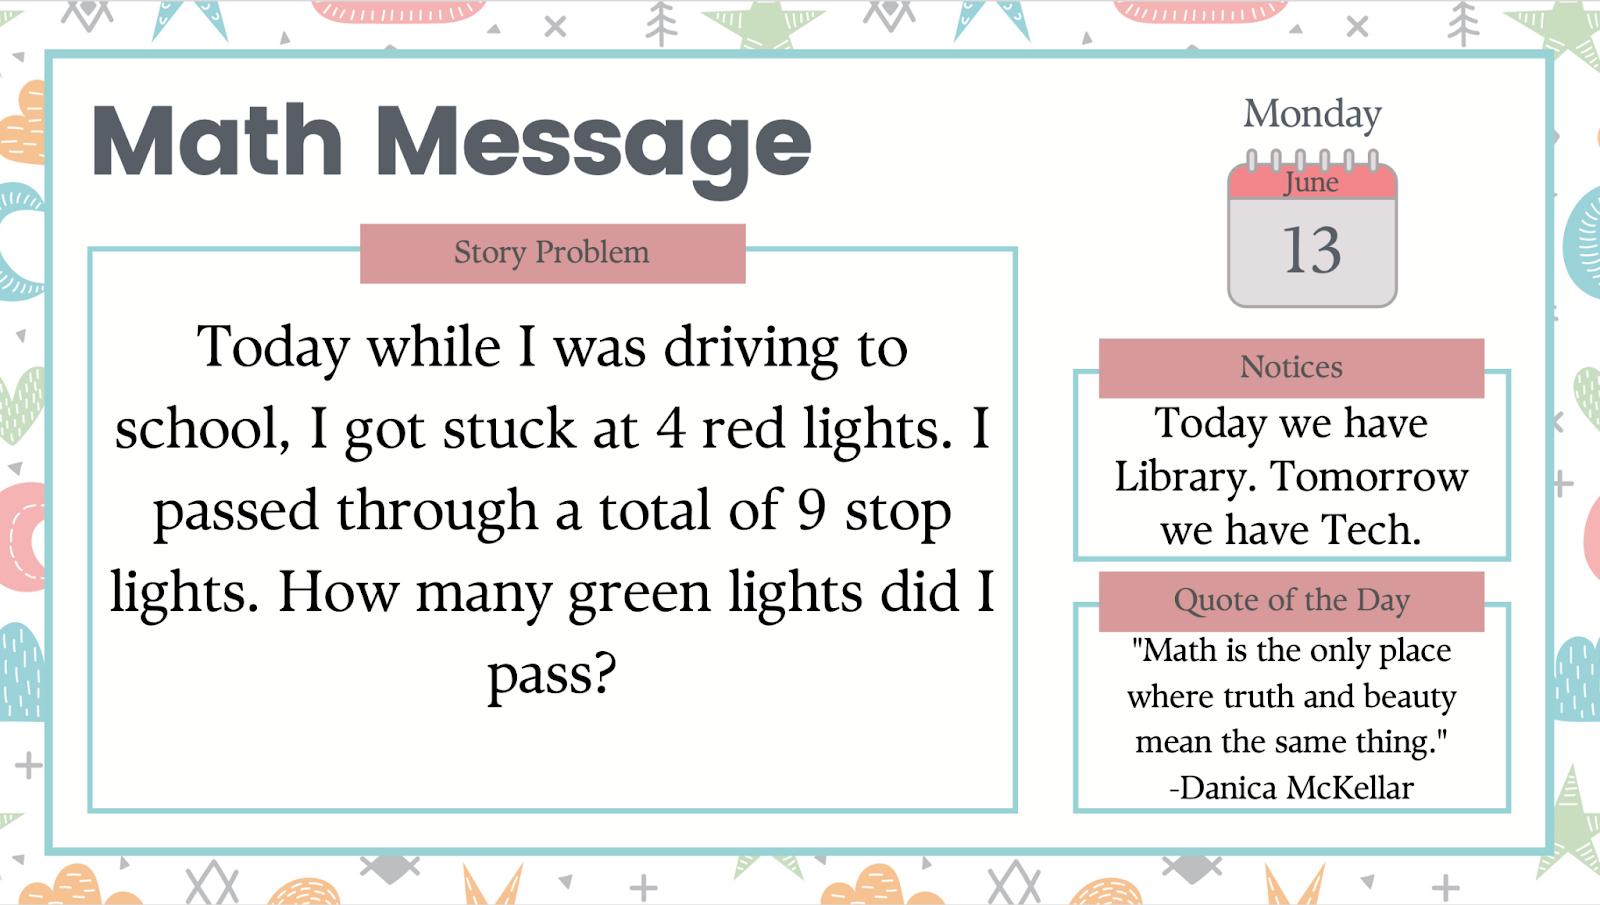 An example of math message - morning meeting message